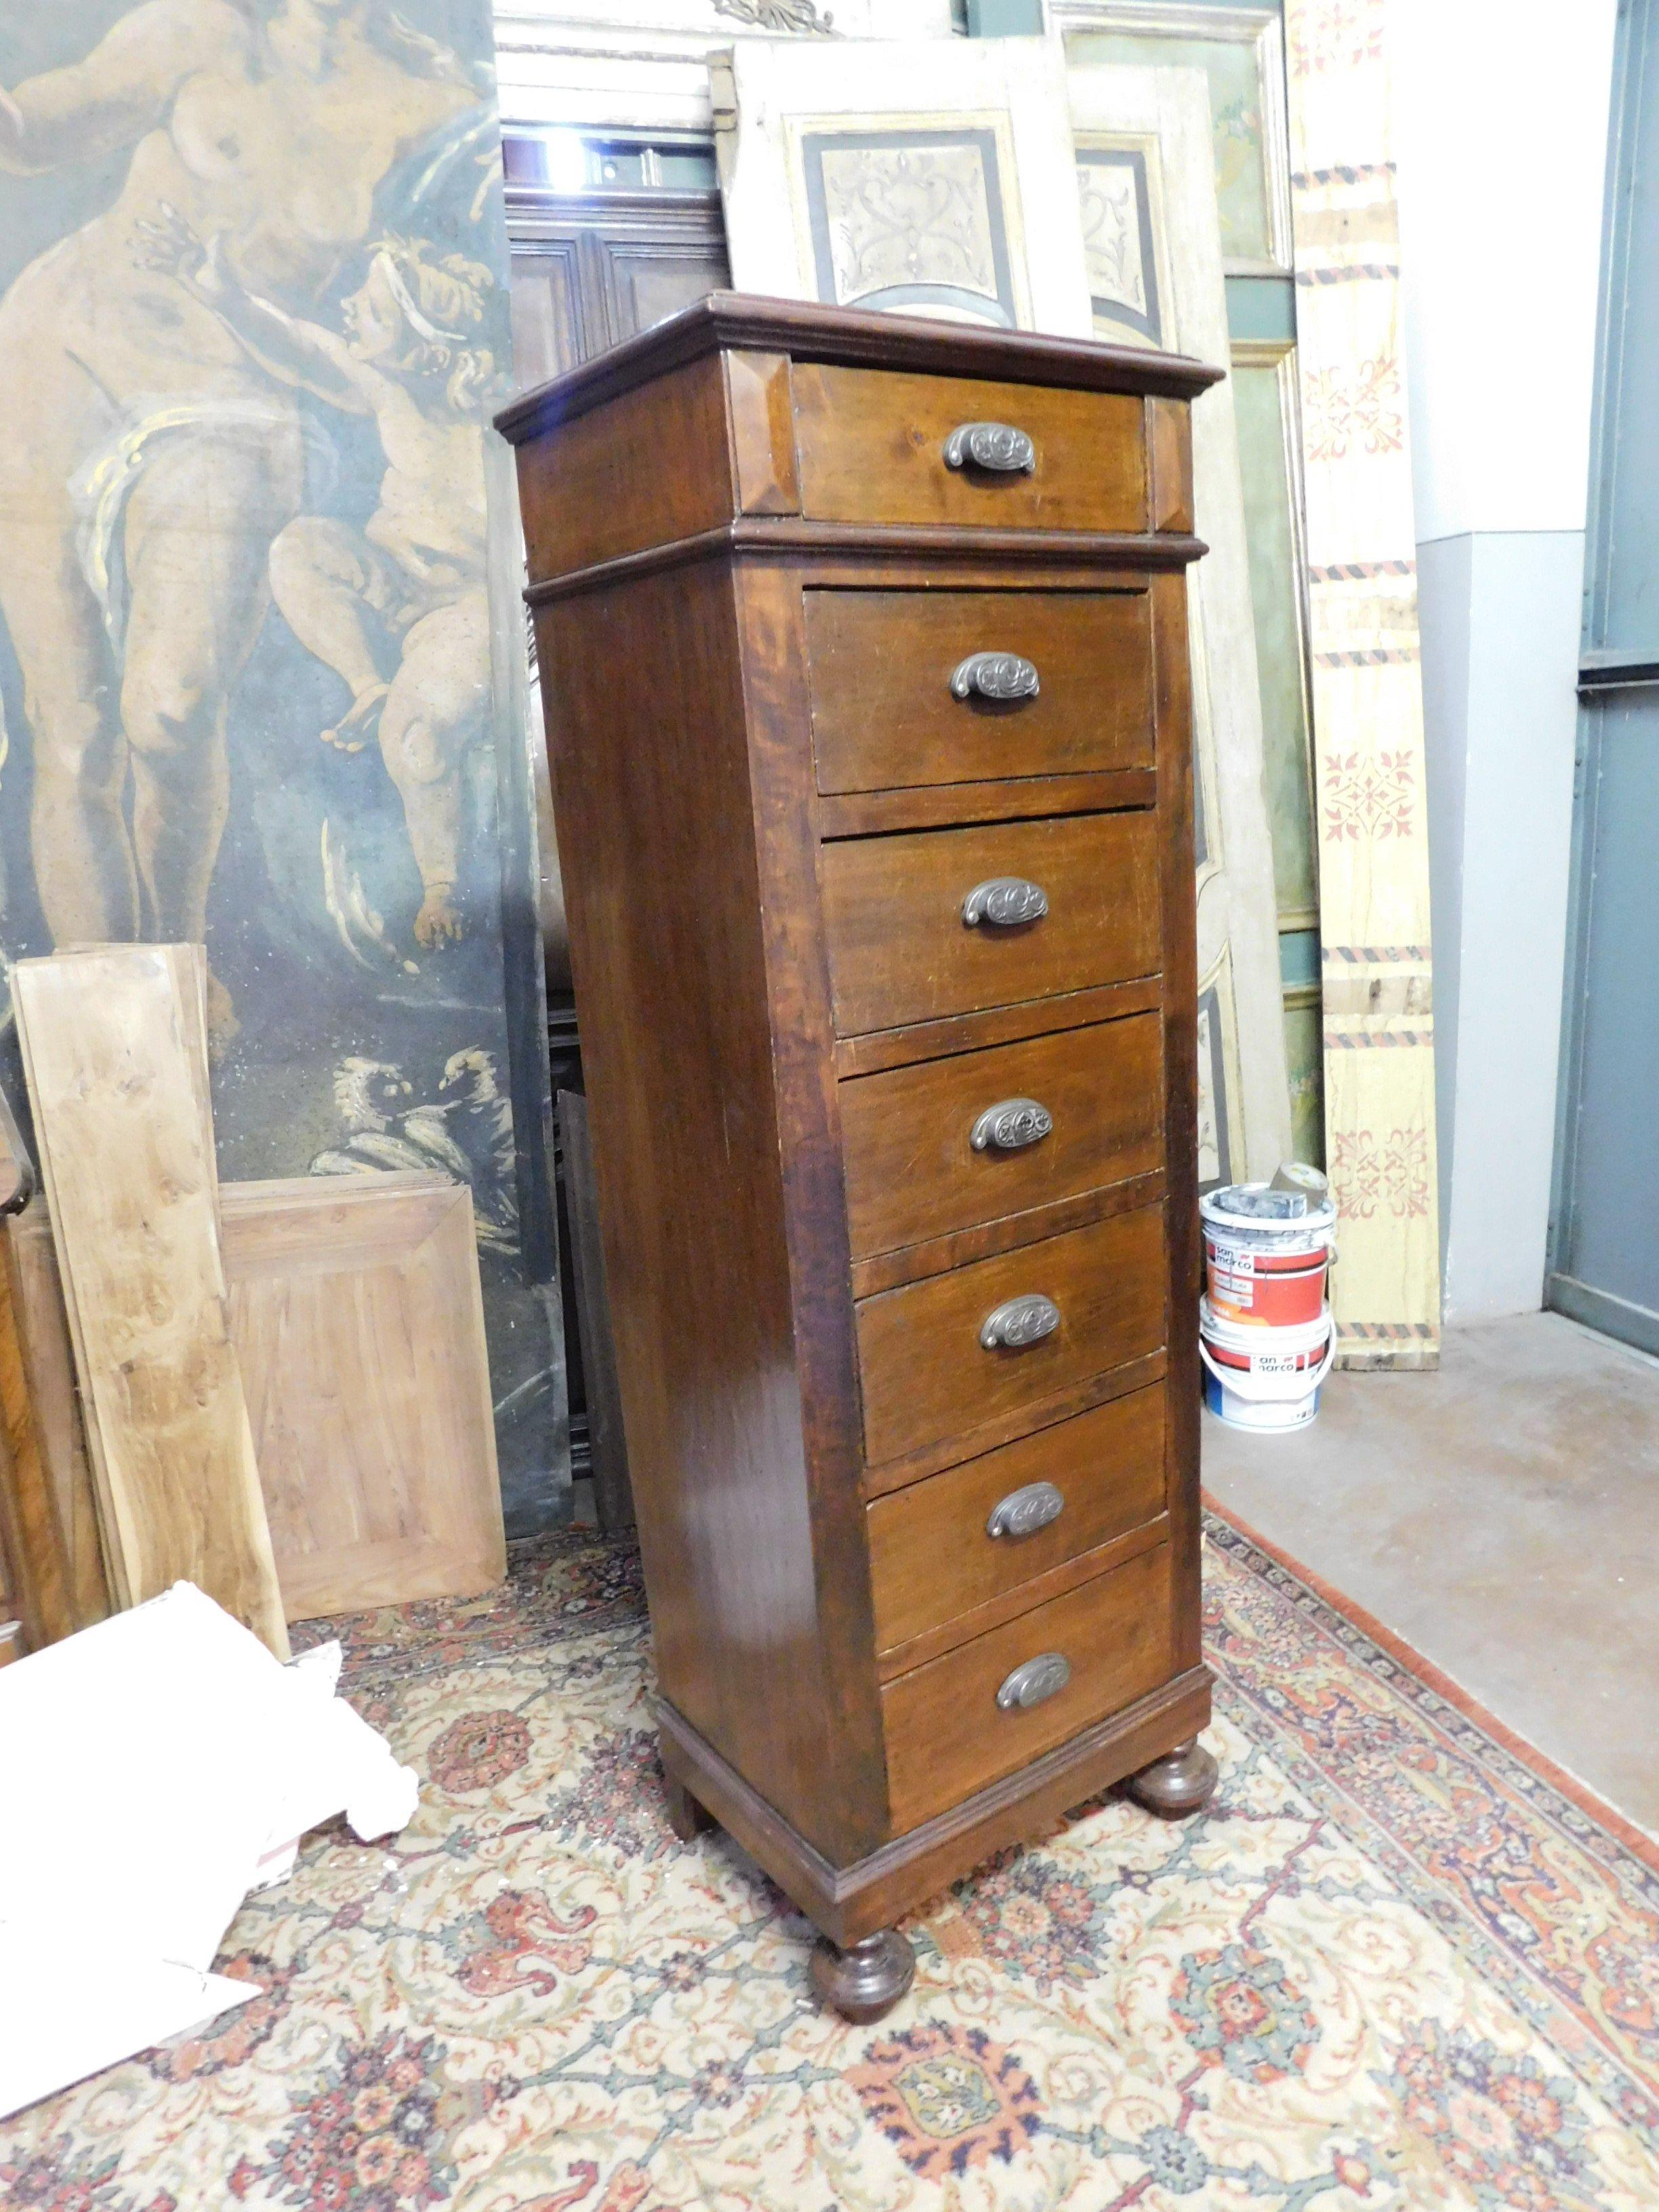 Antique chest of drawers, weekly cabinet with 7 drawers, built in mighty brown walnut wood, wood veneer technique, in excellent condition, ready to use and very beautiful. Handmade in the late 19th century in Italy.
Typical bedroom chest of